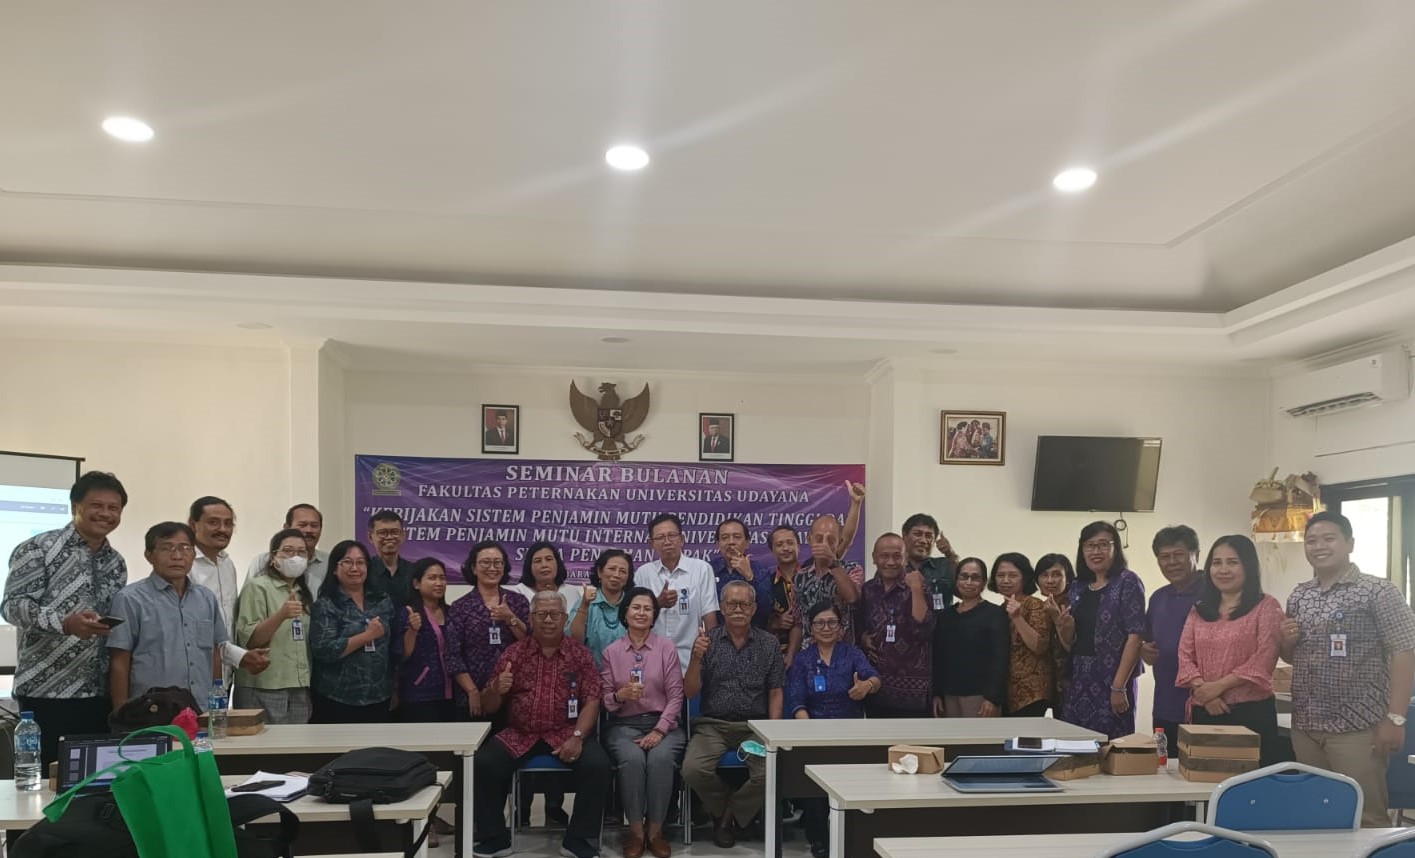 Faculty of Animal Husbandry of Udayana University Holds Monthly Seminar with the Theme of Higher Education Quality Assurance System Policy and Udayana University Internal Quality Assurance System and Completion of DUPAK